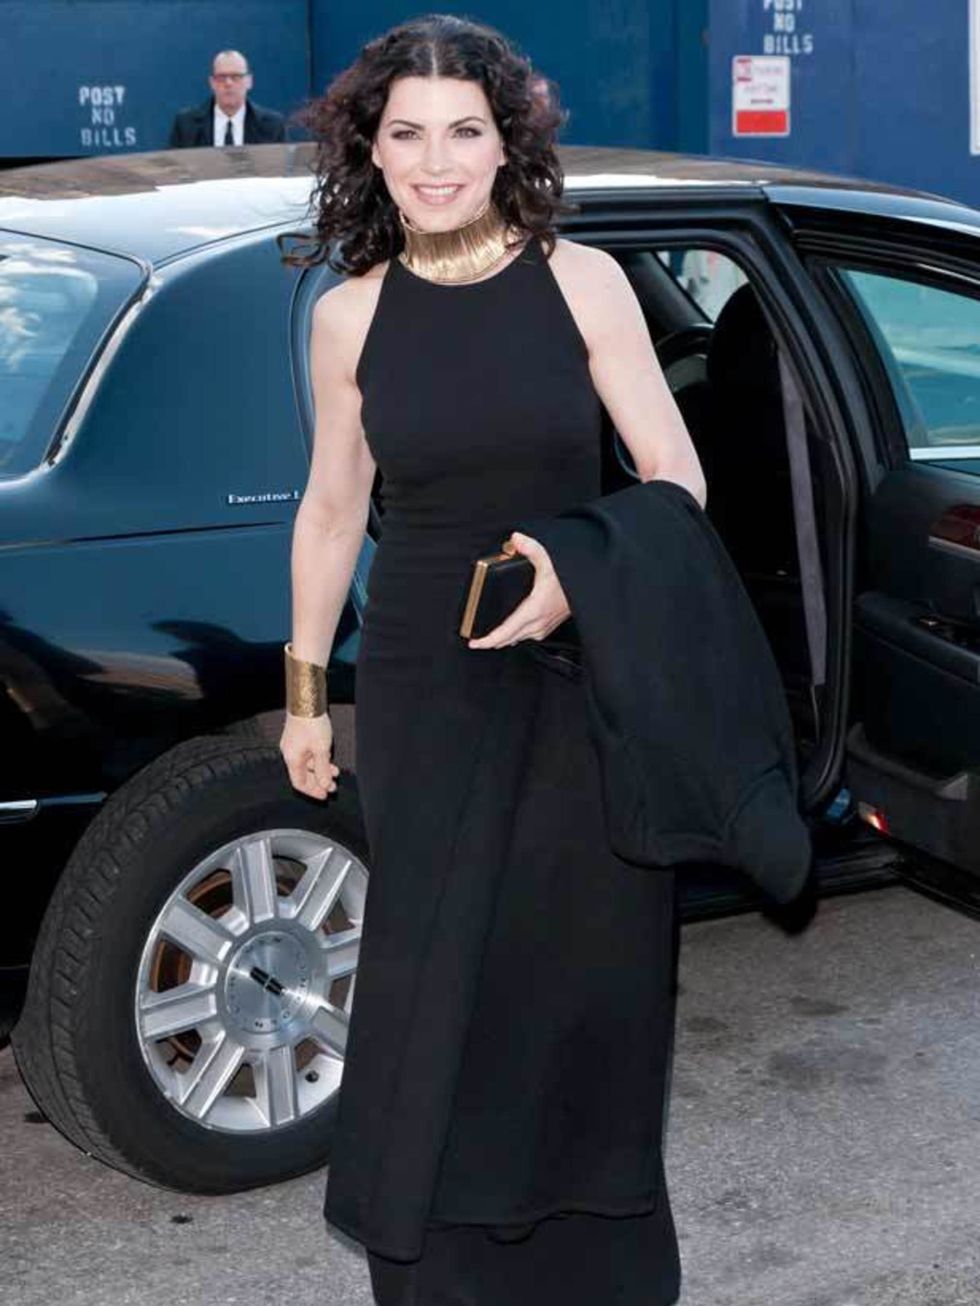 <p> </p><p>Julianna Margulies keeps it simple in a black dress with metallic accents at the Metropolitan Opera gala premiere of 'Rossini's Le Comte Ory'</p>